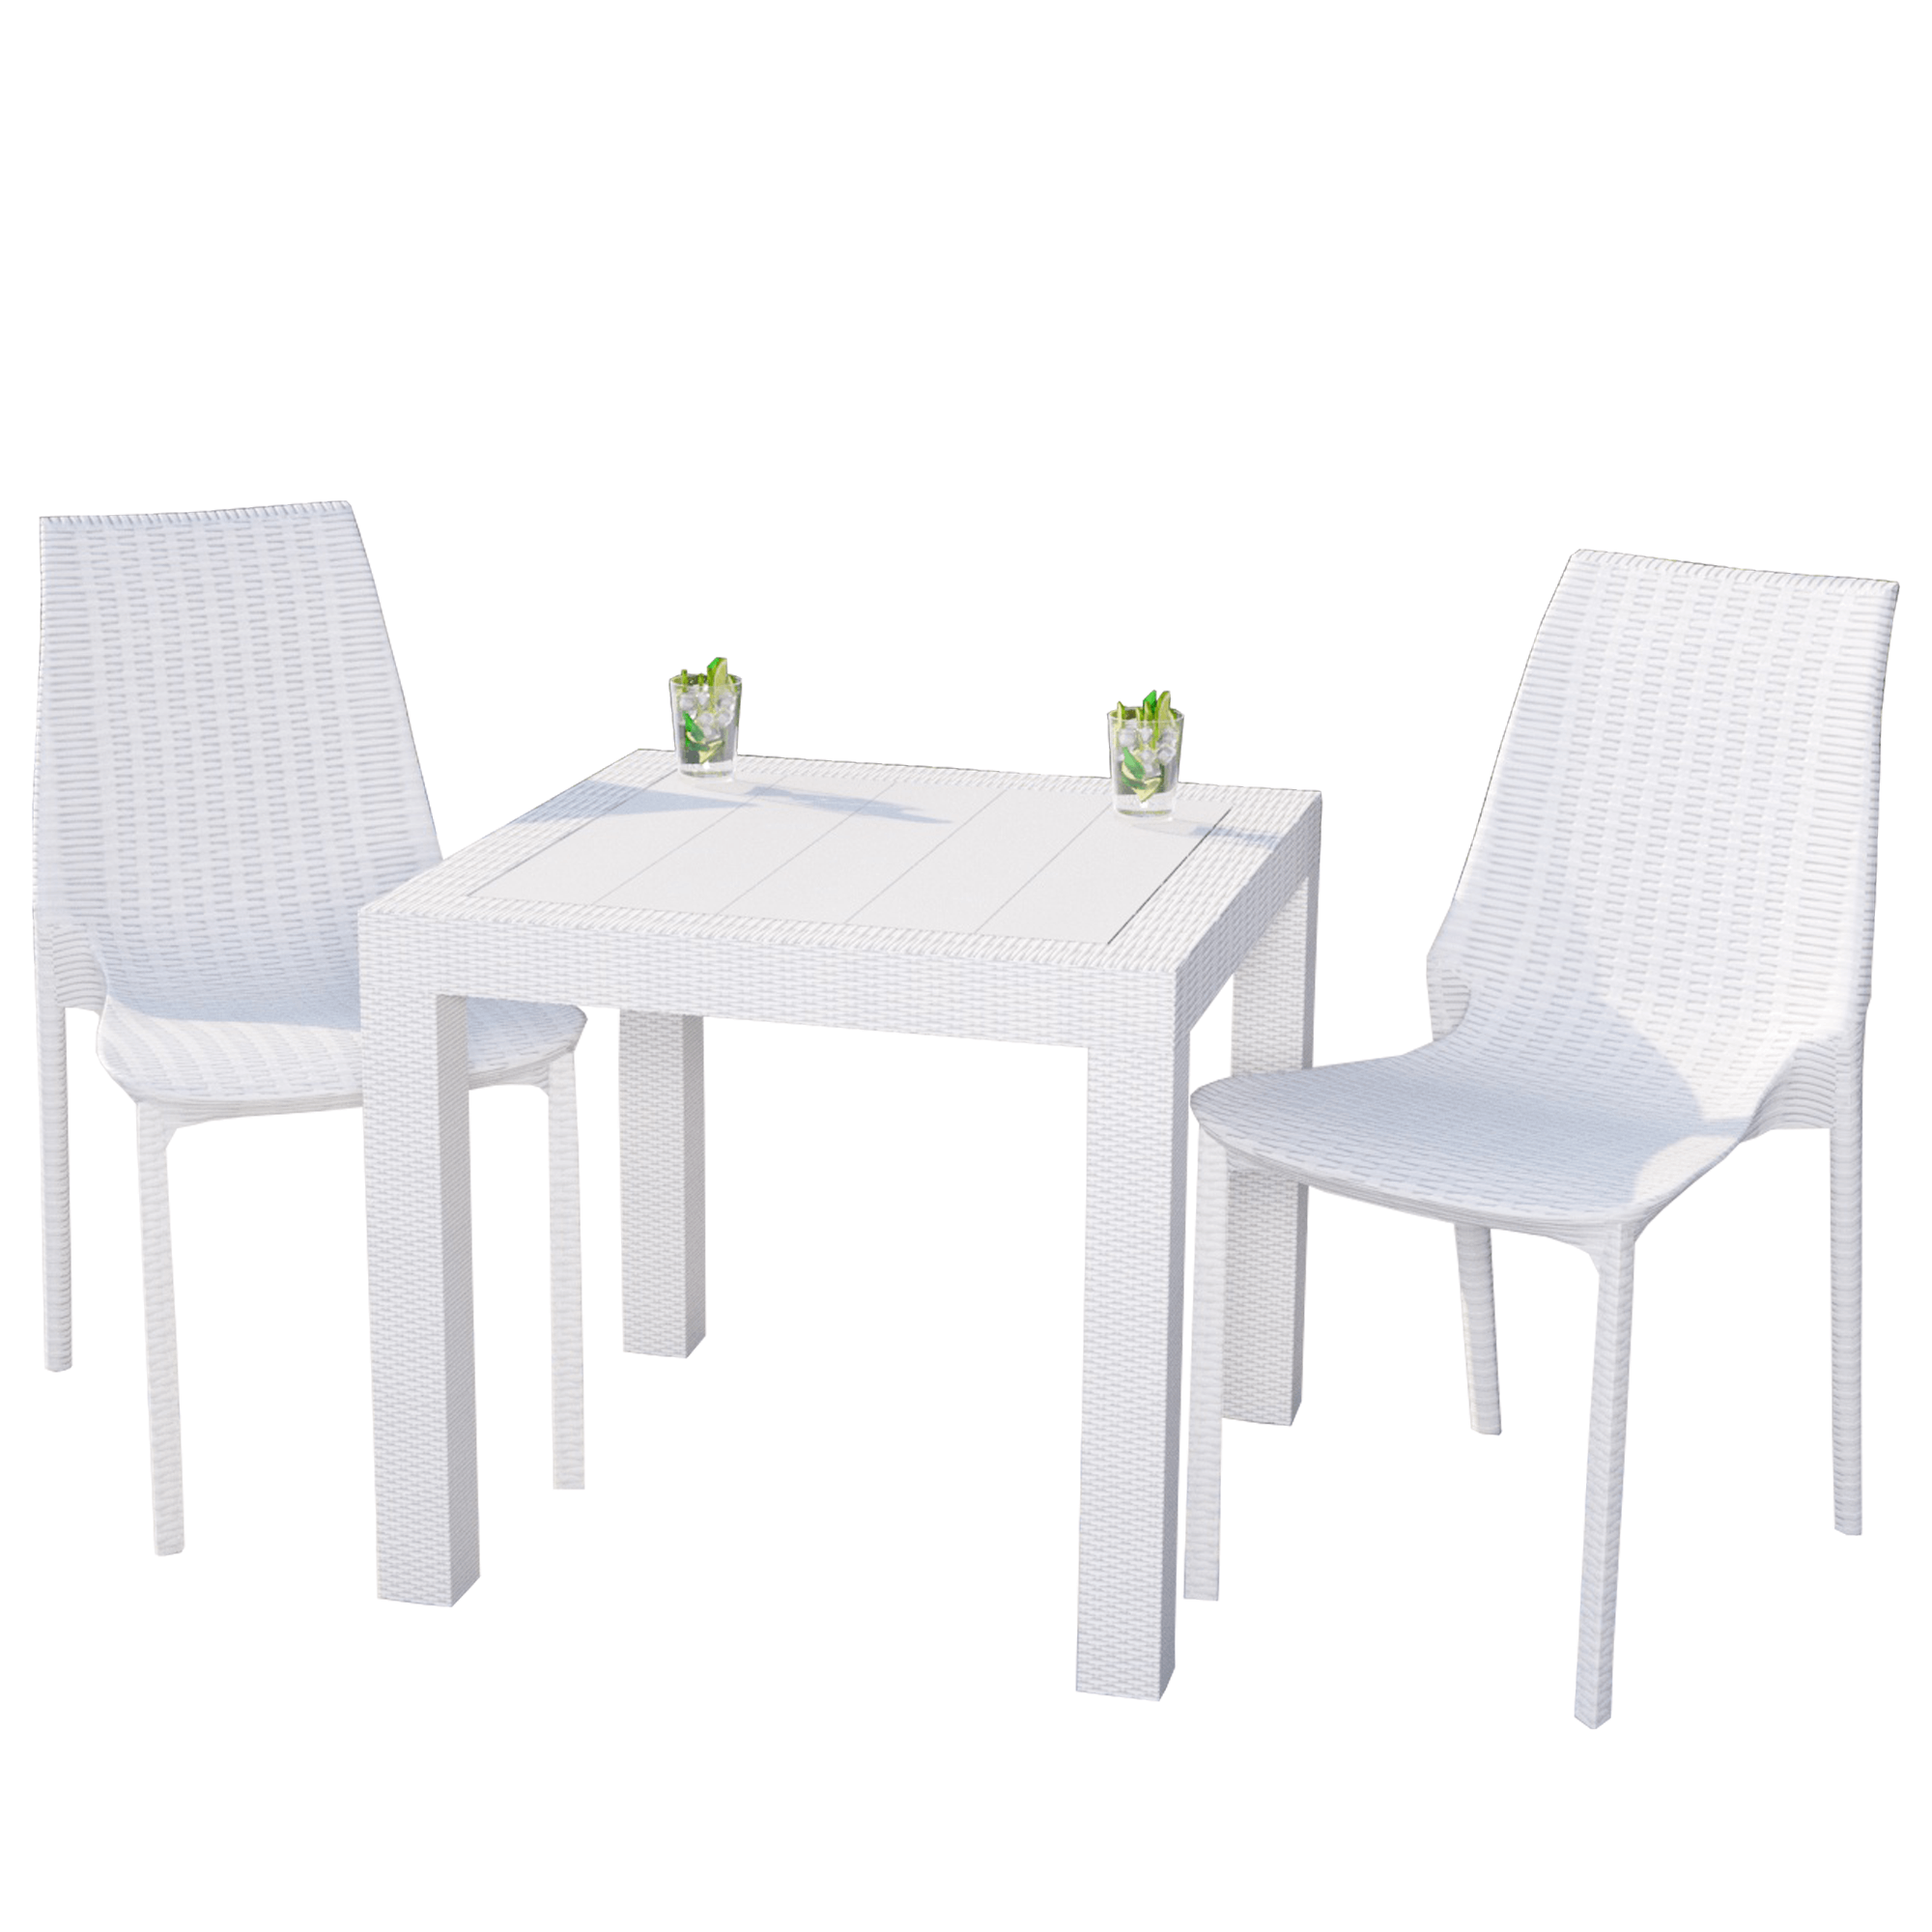 LeisureMod Kent Mid-Century Modern Weave Design 2-Piece Outdoor Patio Dining Set with Plastic Square Table and 2 Stackable Chairs for Patio, Poolside, and Backyard Garden (White) - image 1 of 18